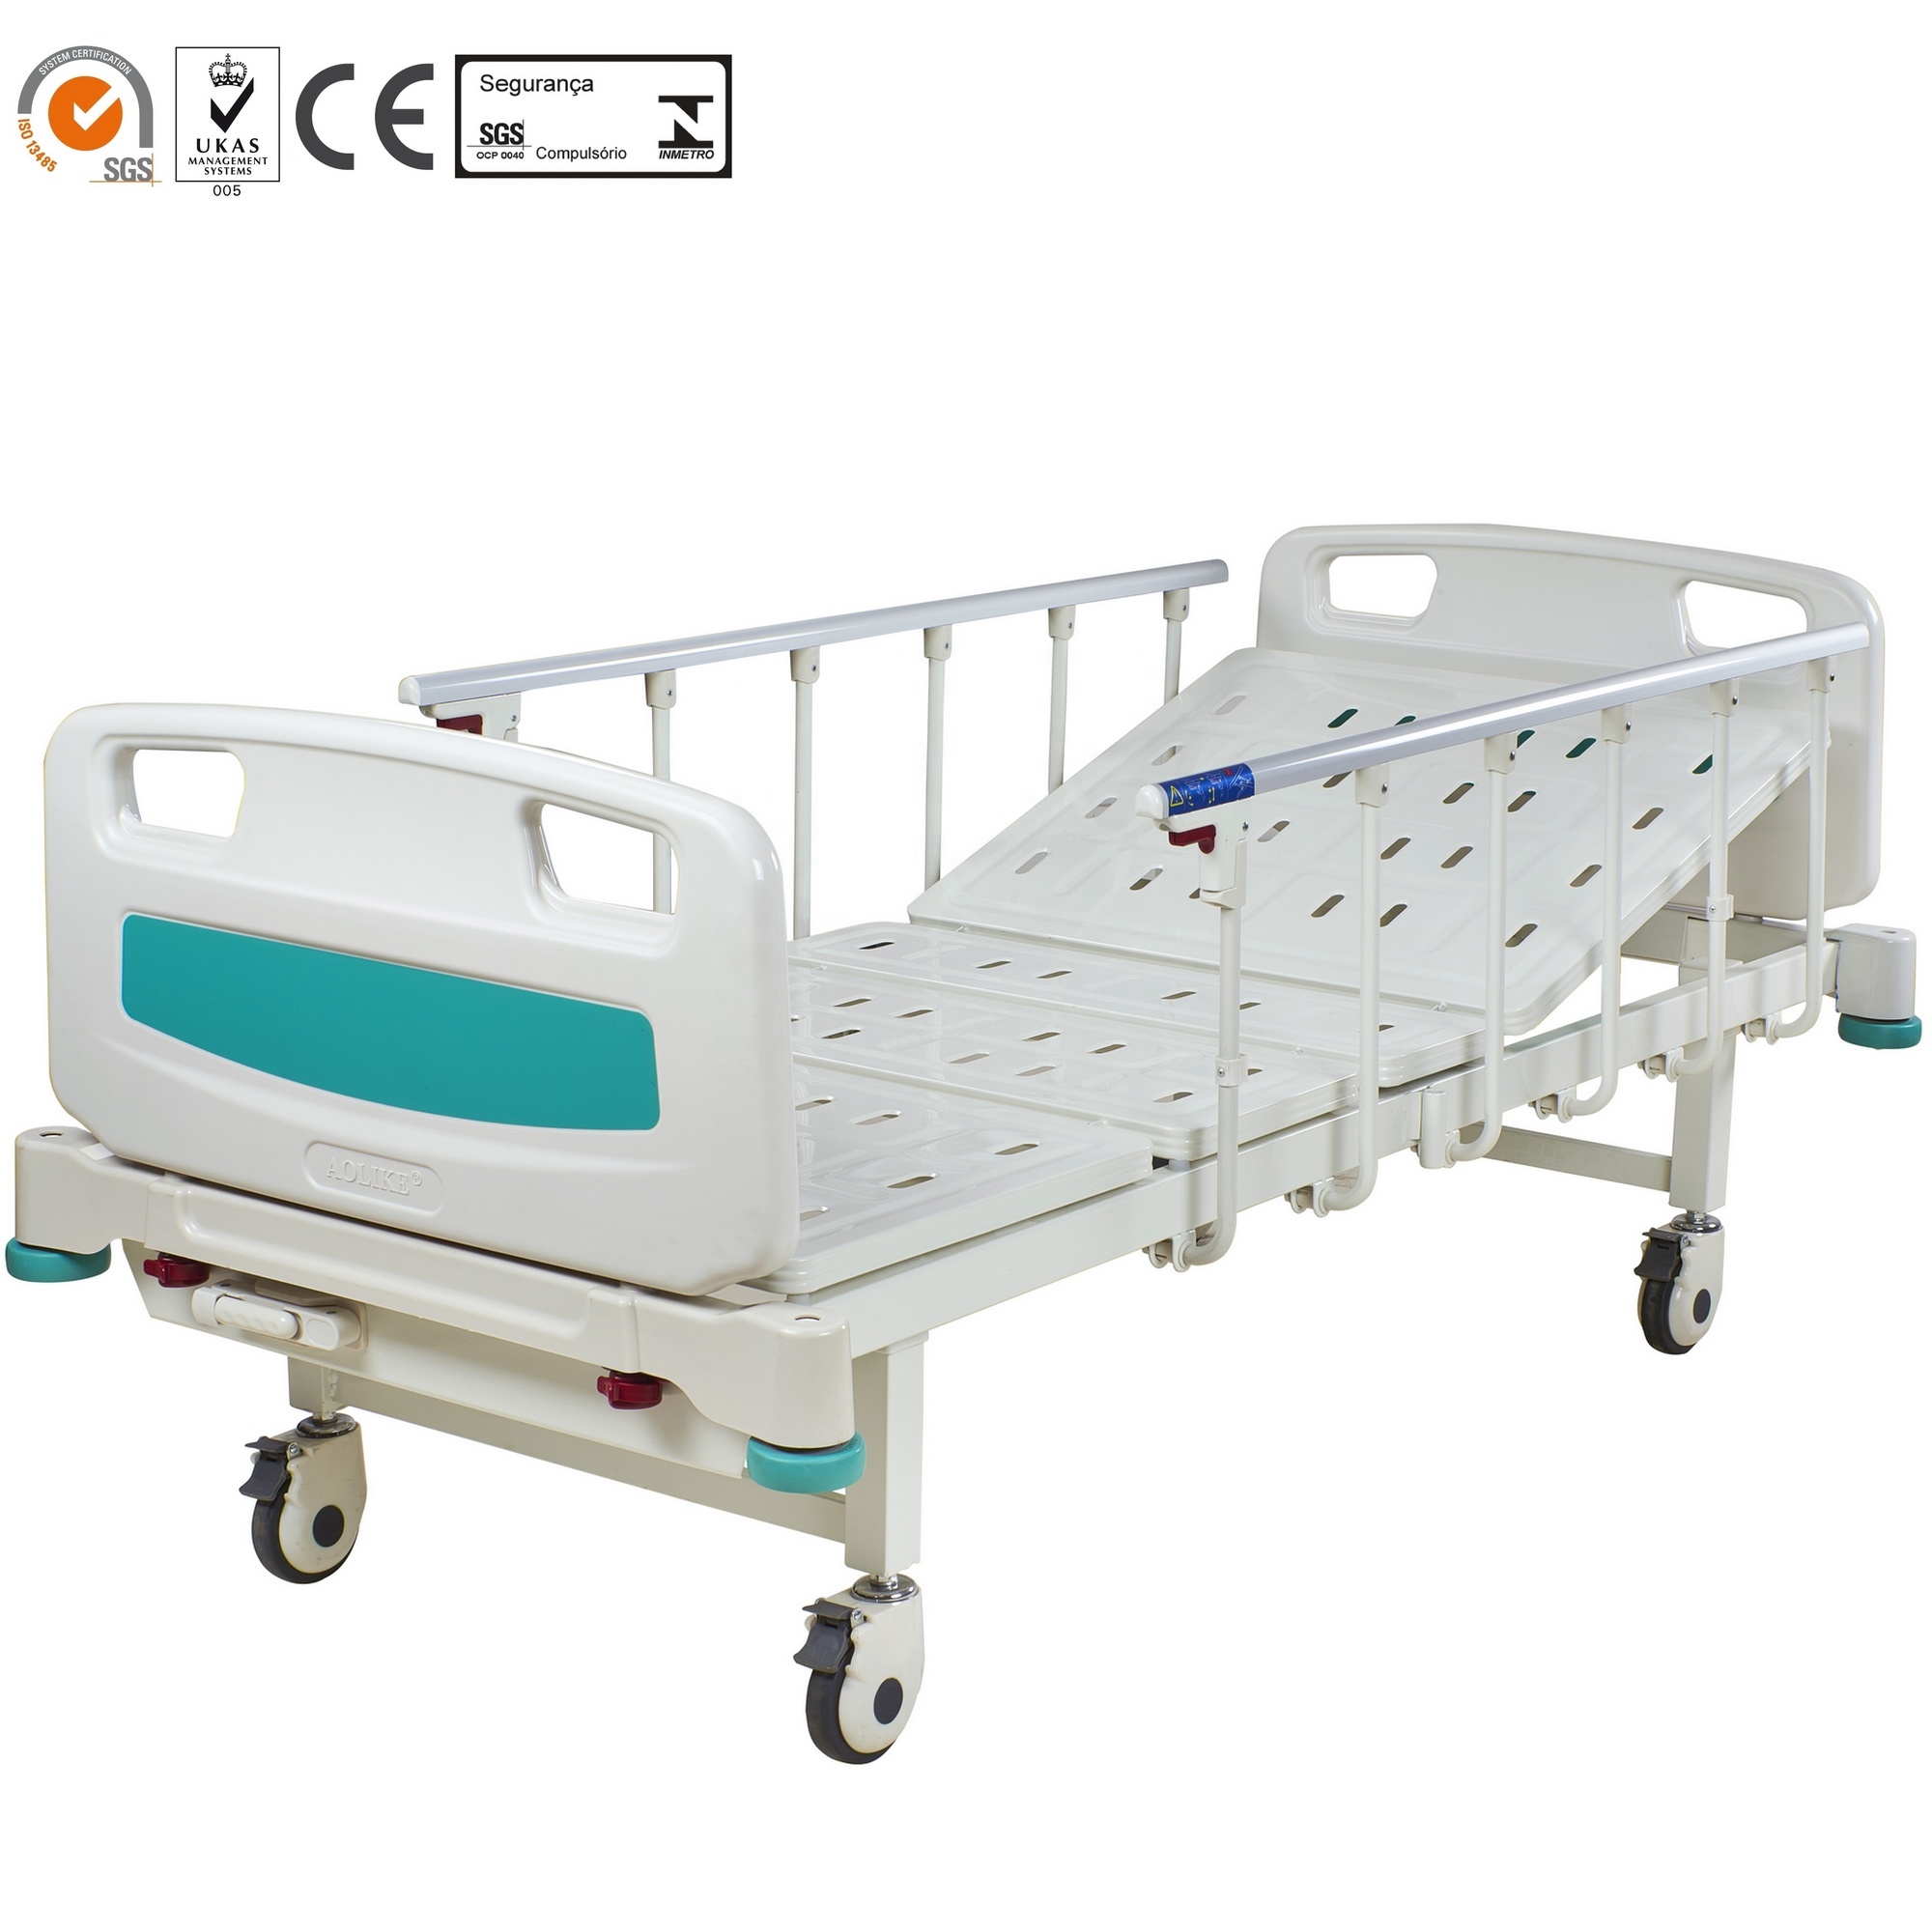 Bestseller Good Price Hospital Furniture Manufacturers 1 Functions One Cranks Manual Nursing Bed Metal Avalibale Availiable